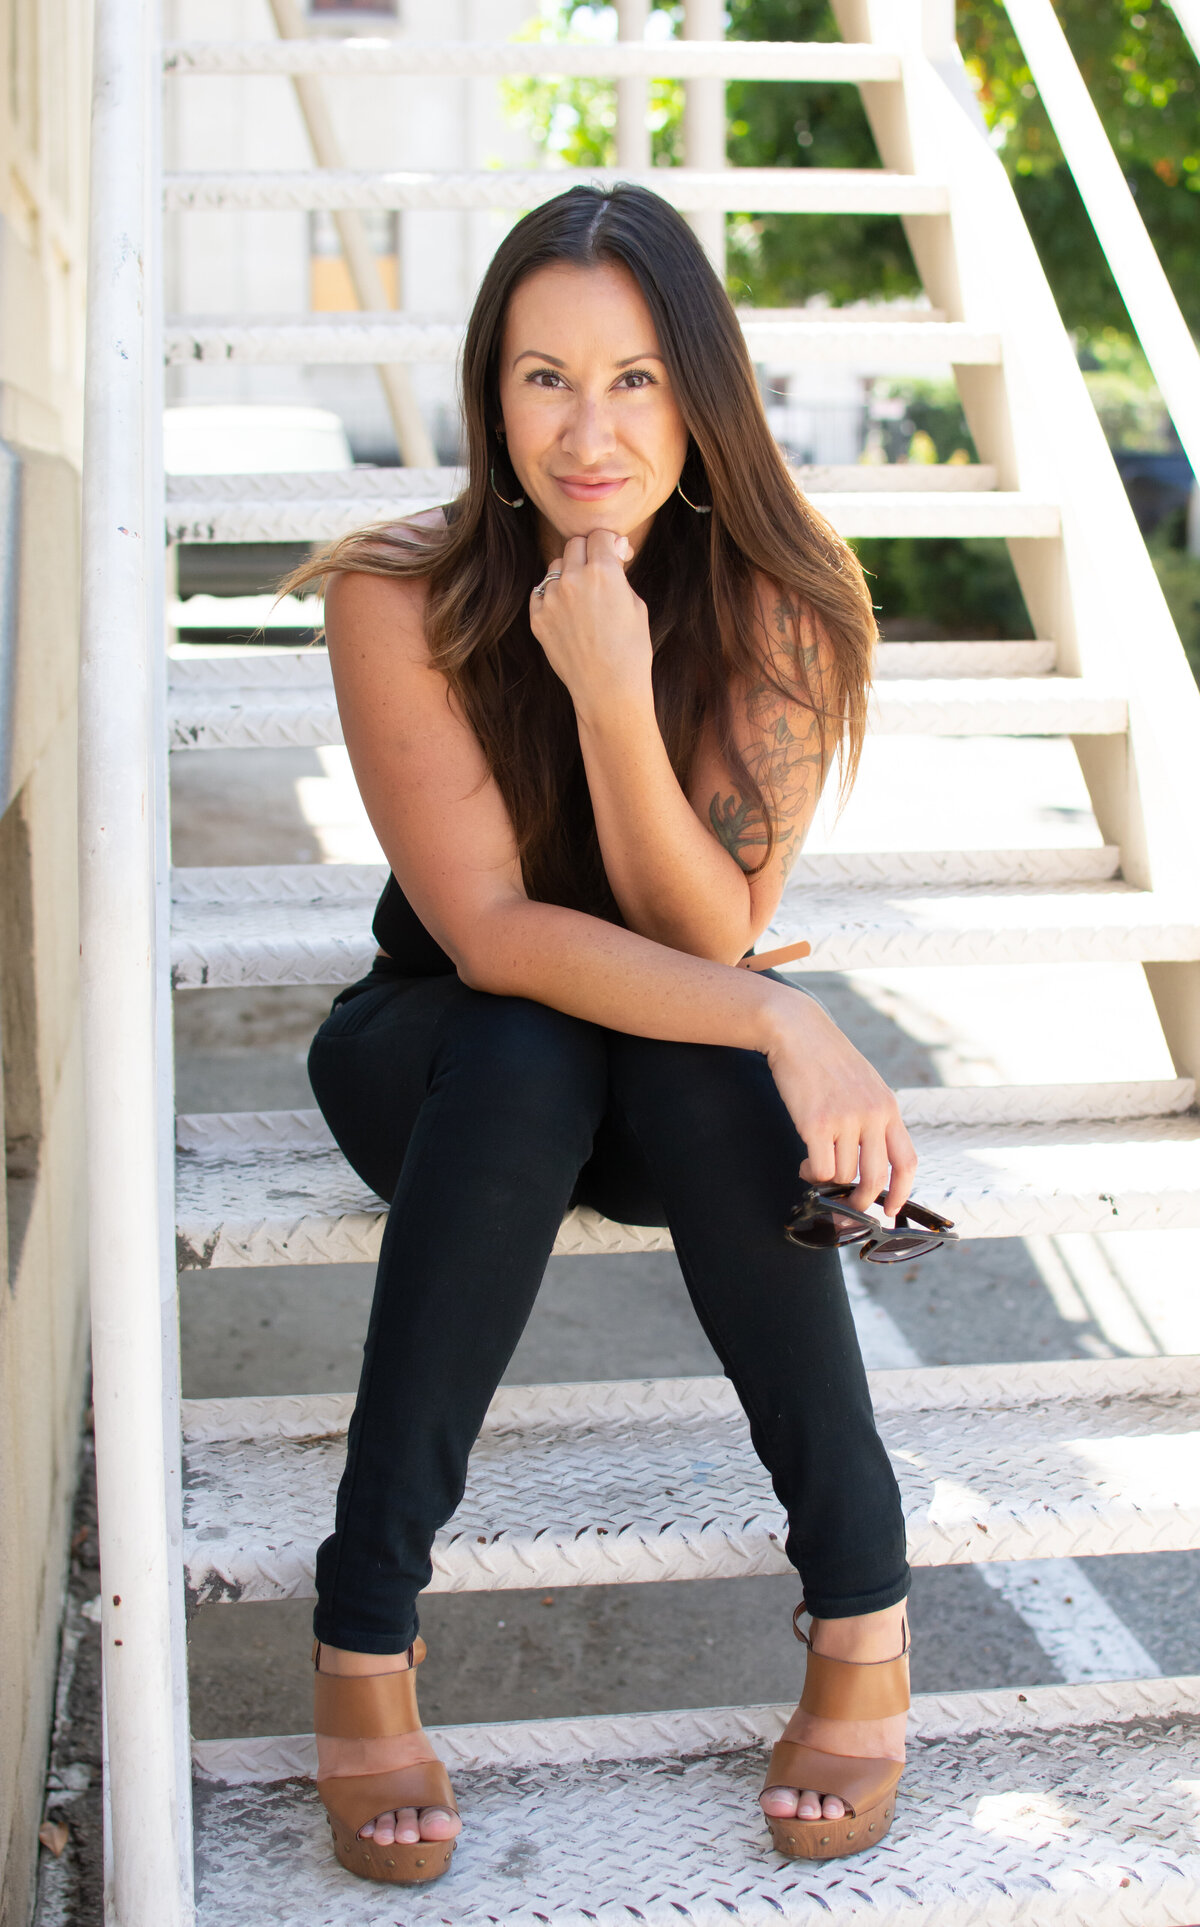 Business Headshot Photography. Female sitting on steps outdoors in all black.